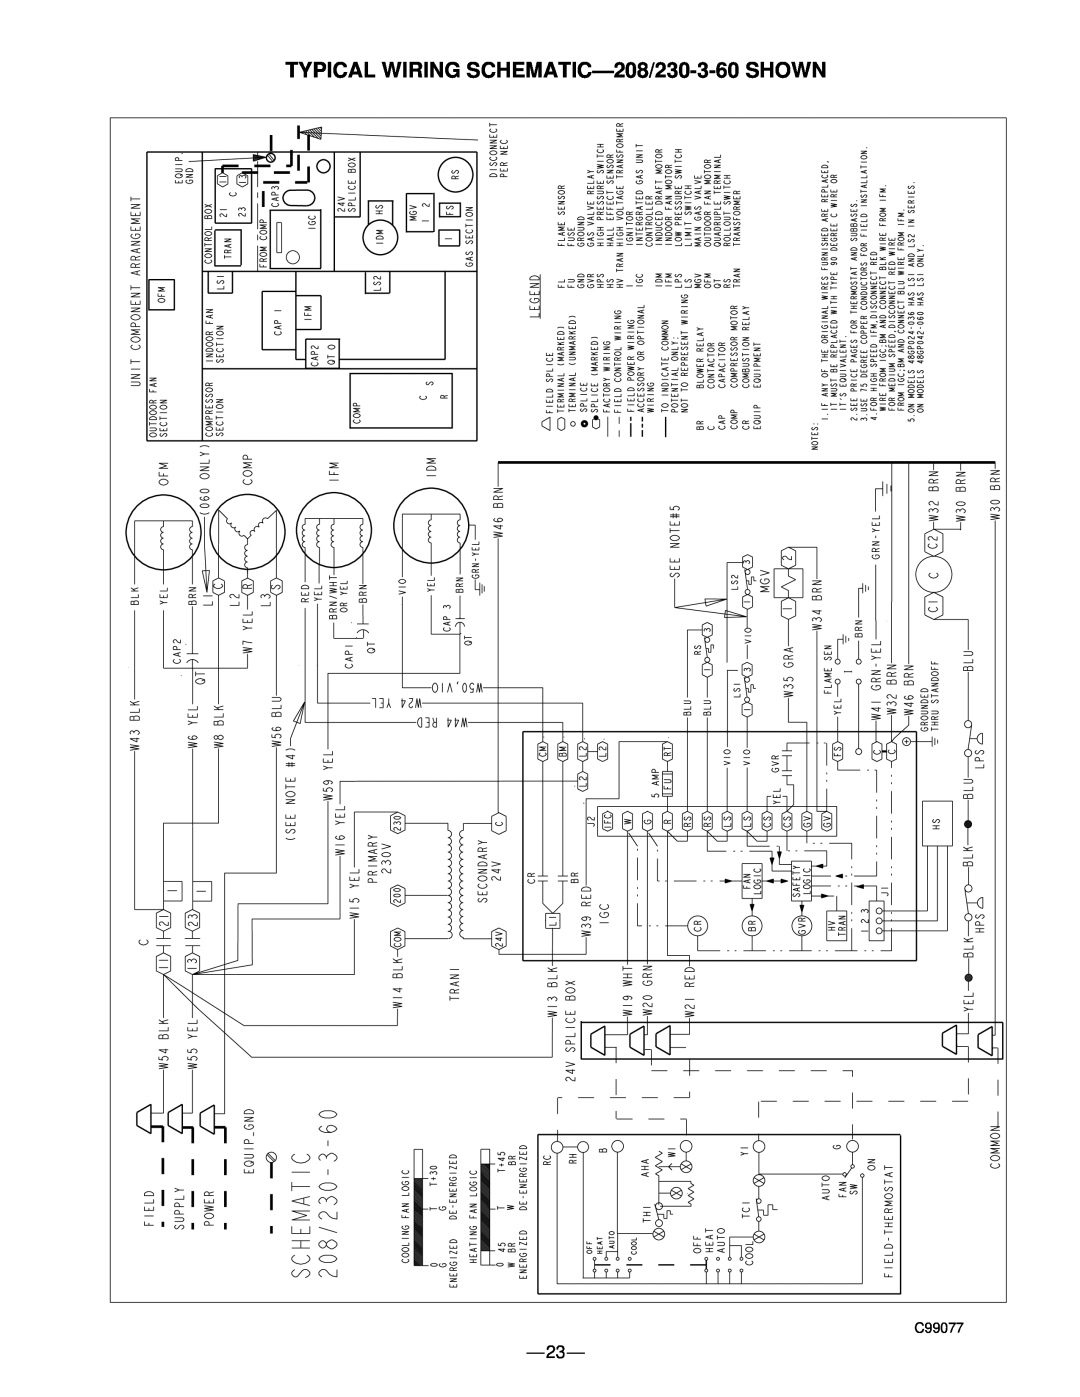 Bryant 583B manual TYPICAL WIRING SCHEMATIC-208/230-3-60SHOWN, C99077 